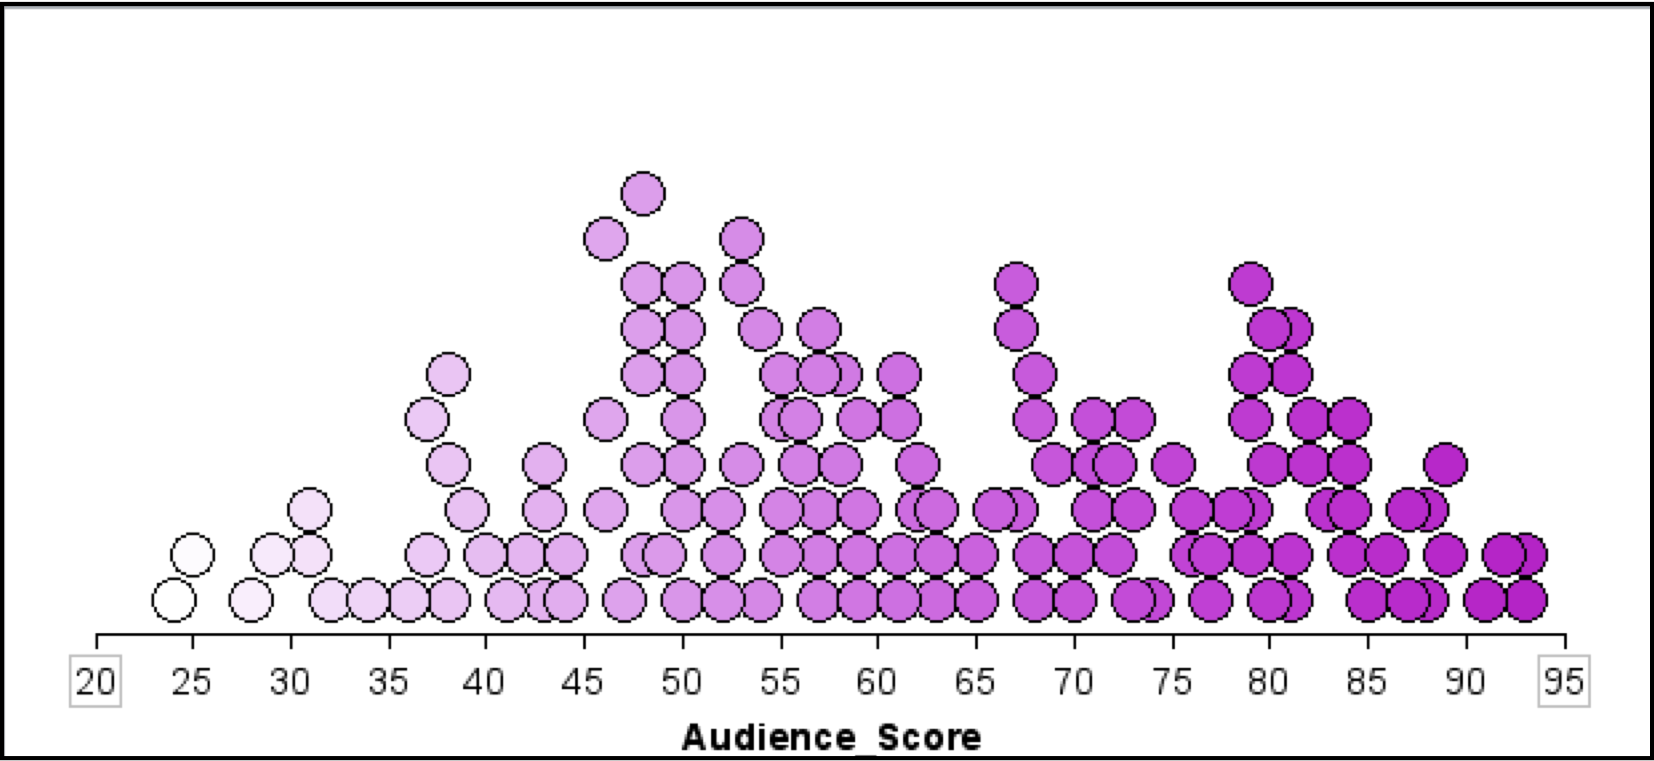 The scores for 134 movies released in 2009 based on the general public’s reviews. The scores represent the percentage of positive reviews for each movie.